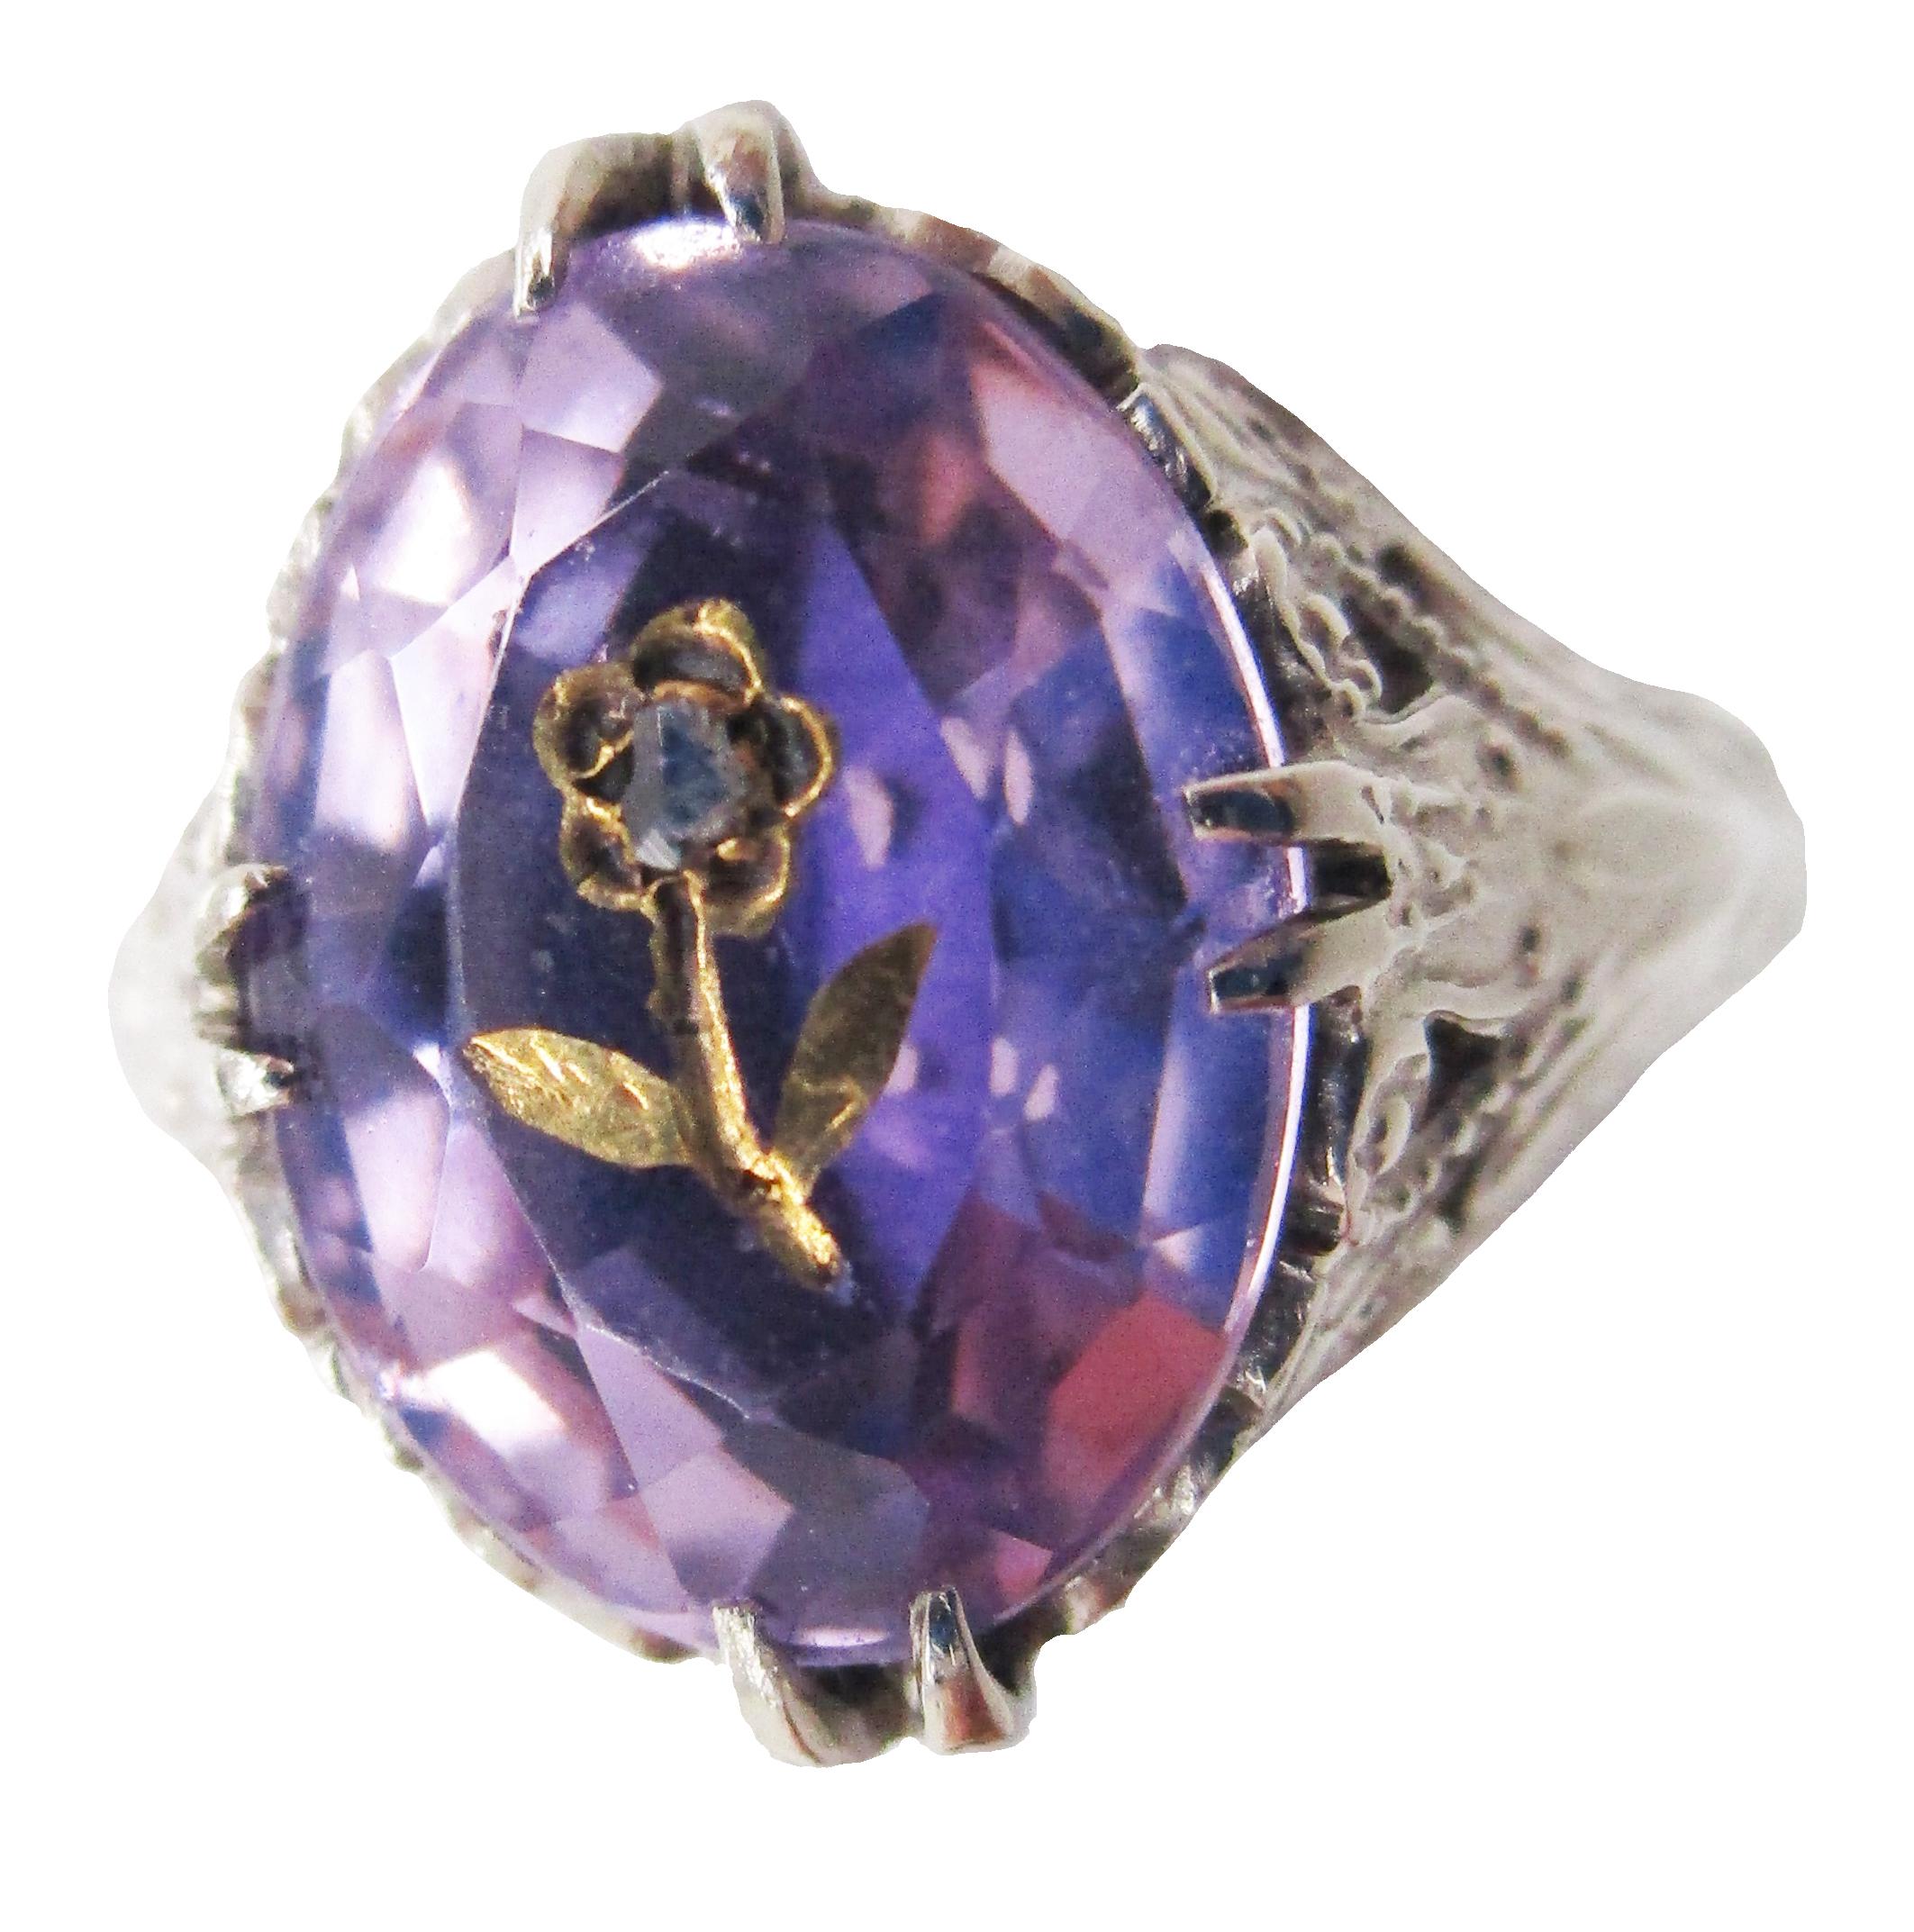 Oval Cut 14 Karat White Gold Filigree Rose de France Amethyst Ring with Gold Flower Inlay